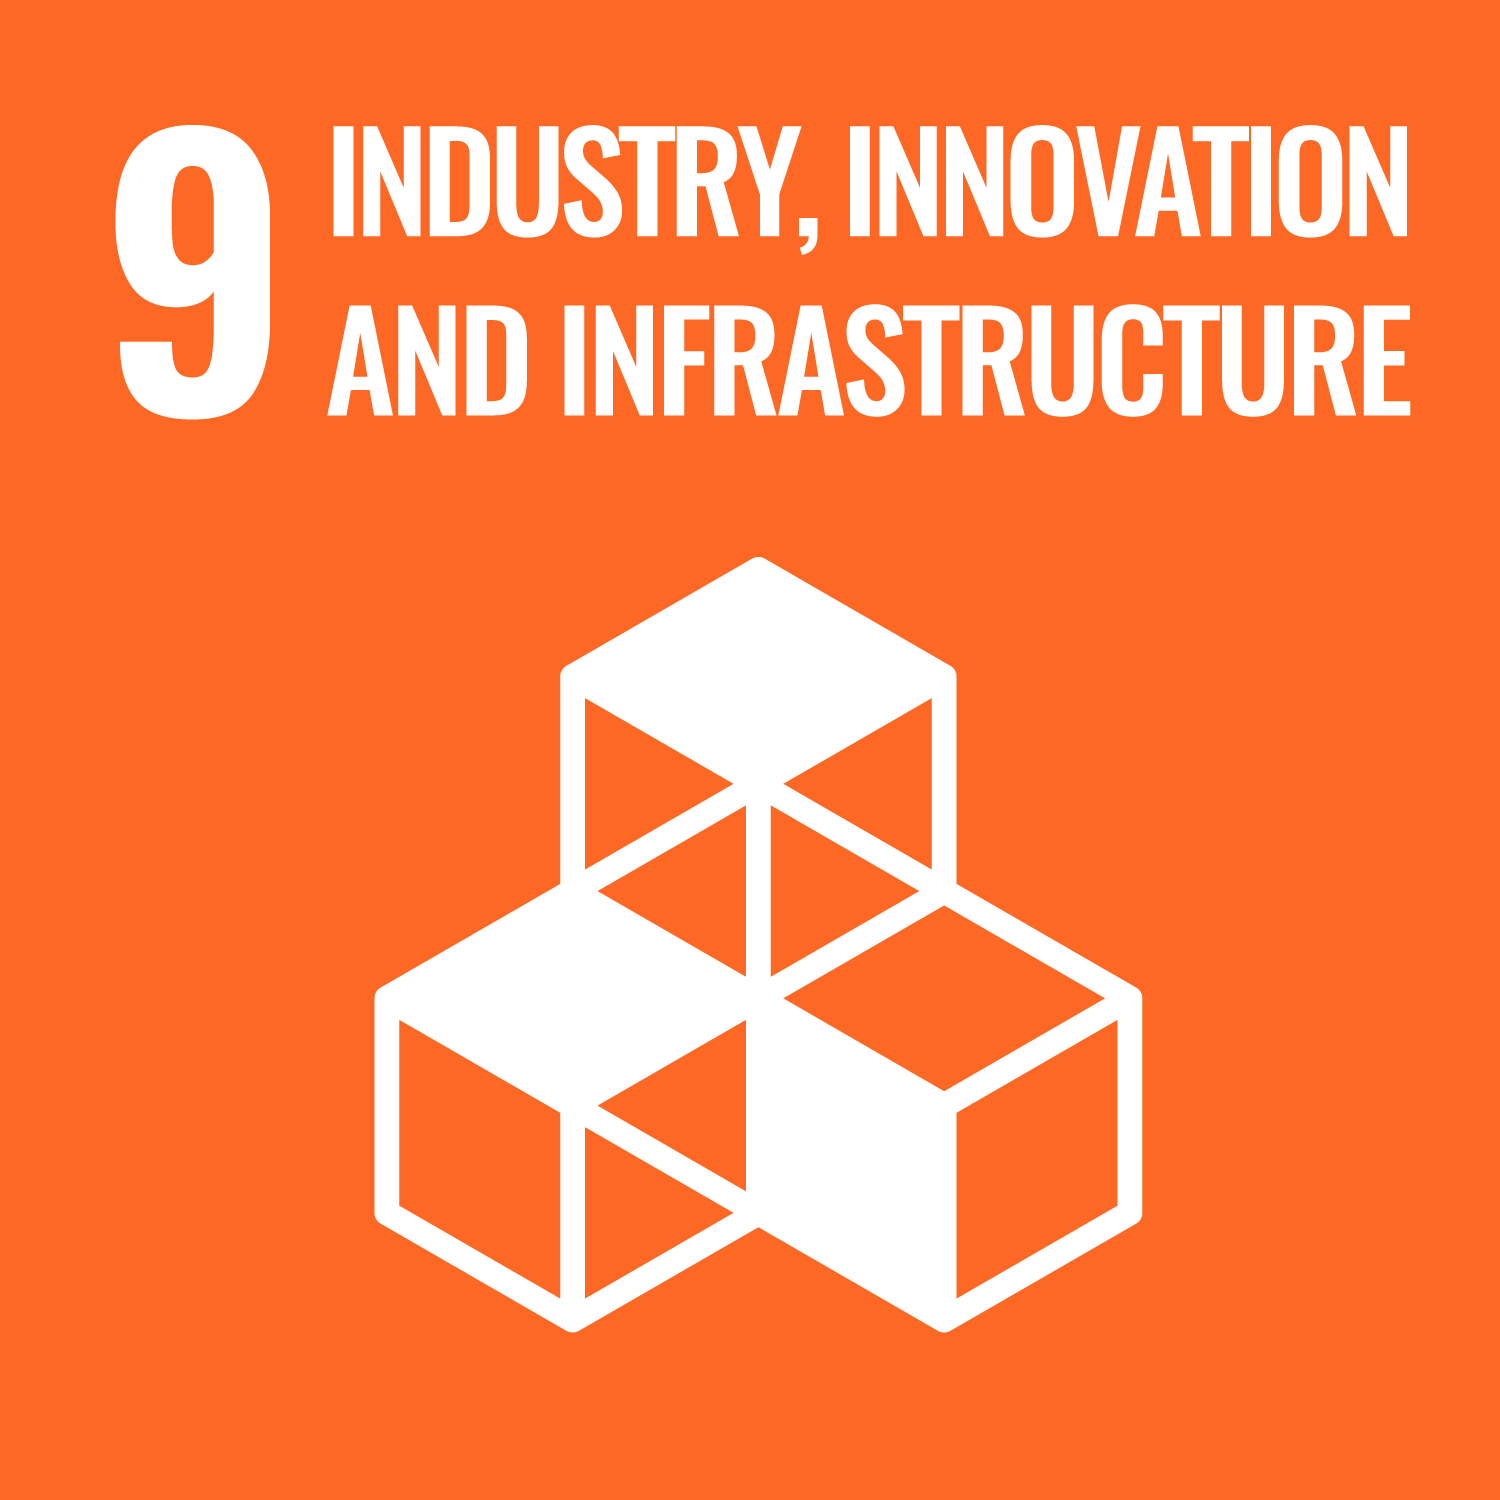 Sustainable Development Goals (SDG9) Quality Education Industry, Innovation, and Infrastructure